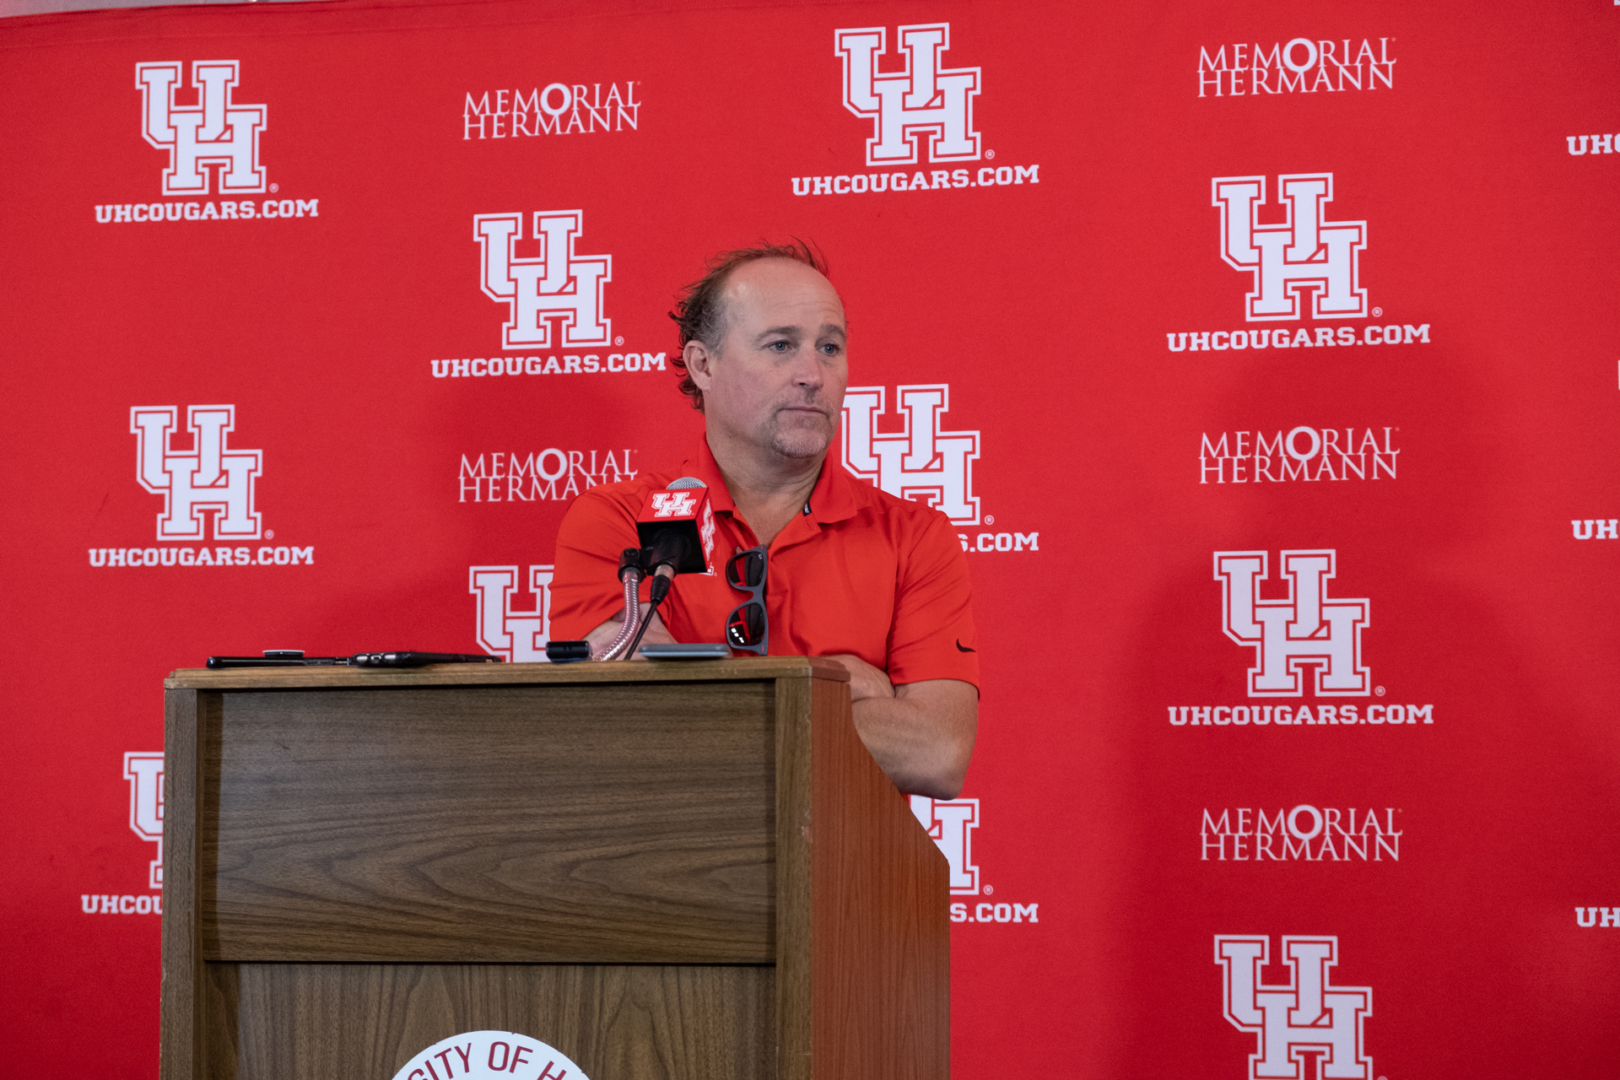 Head coach Dana Holgorsen addressing the media during the 2019 season. On Tuesday afternoon, the head coach said he is aiming for 25-30 practices before the start of the season against Memphis. | Kathryn Lenihan/The Cougar